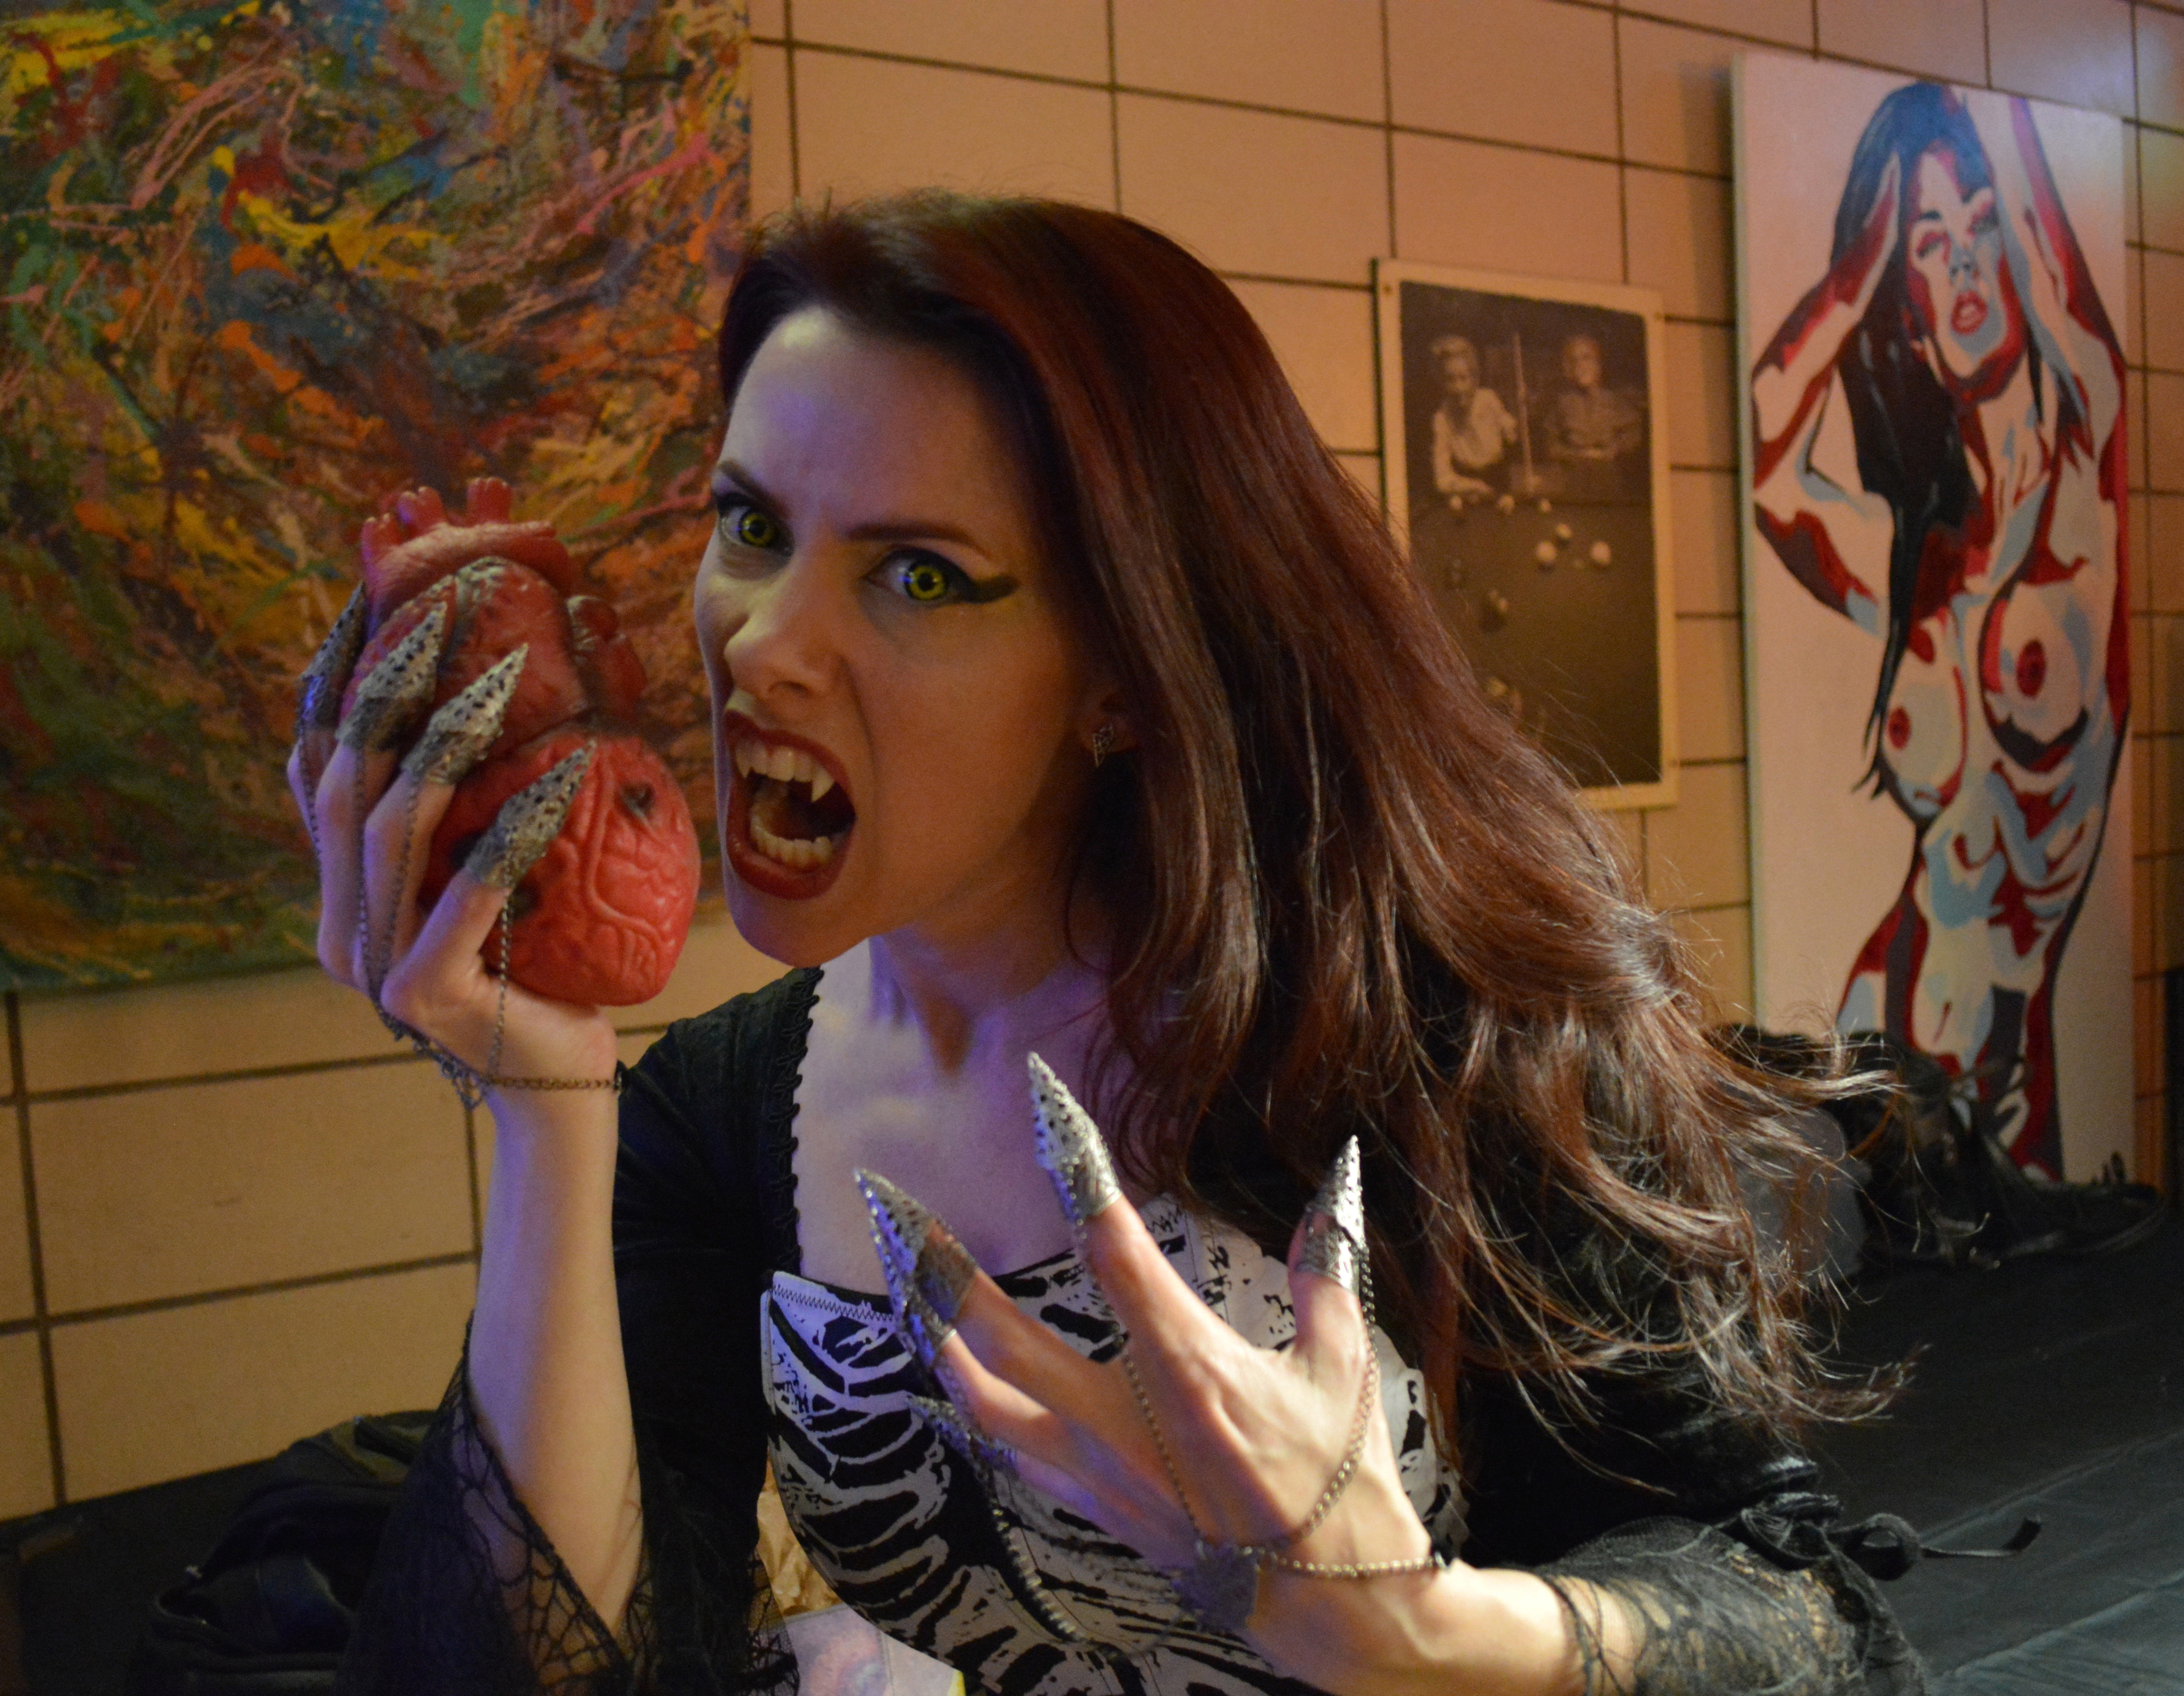 Behind the scenes of the April 11, 2014 MASCARA & POPCORN BODY HORROR CONTEST in Montreal. (R.I.P.) =Fangs by Horror Show Jack Fang smith =Claws by Raven Eve Jewelry